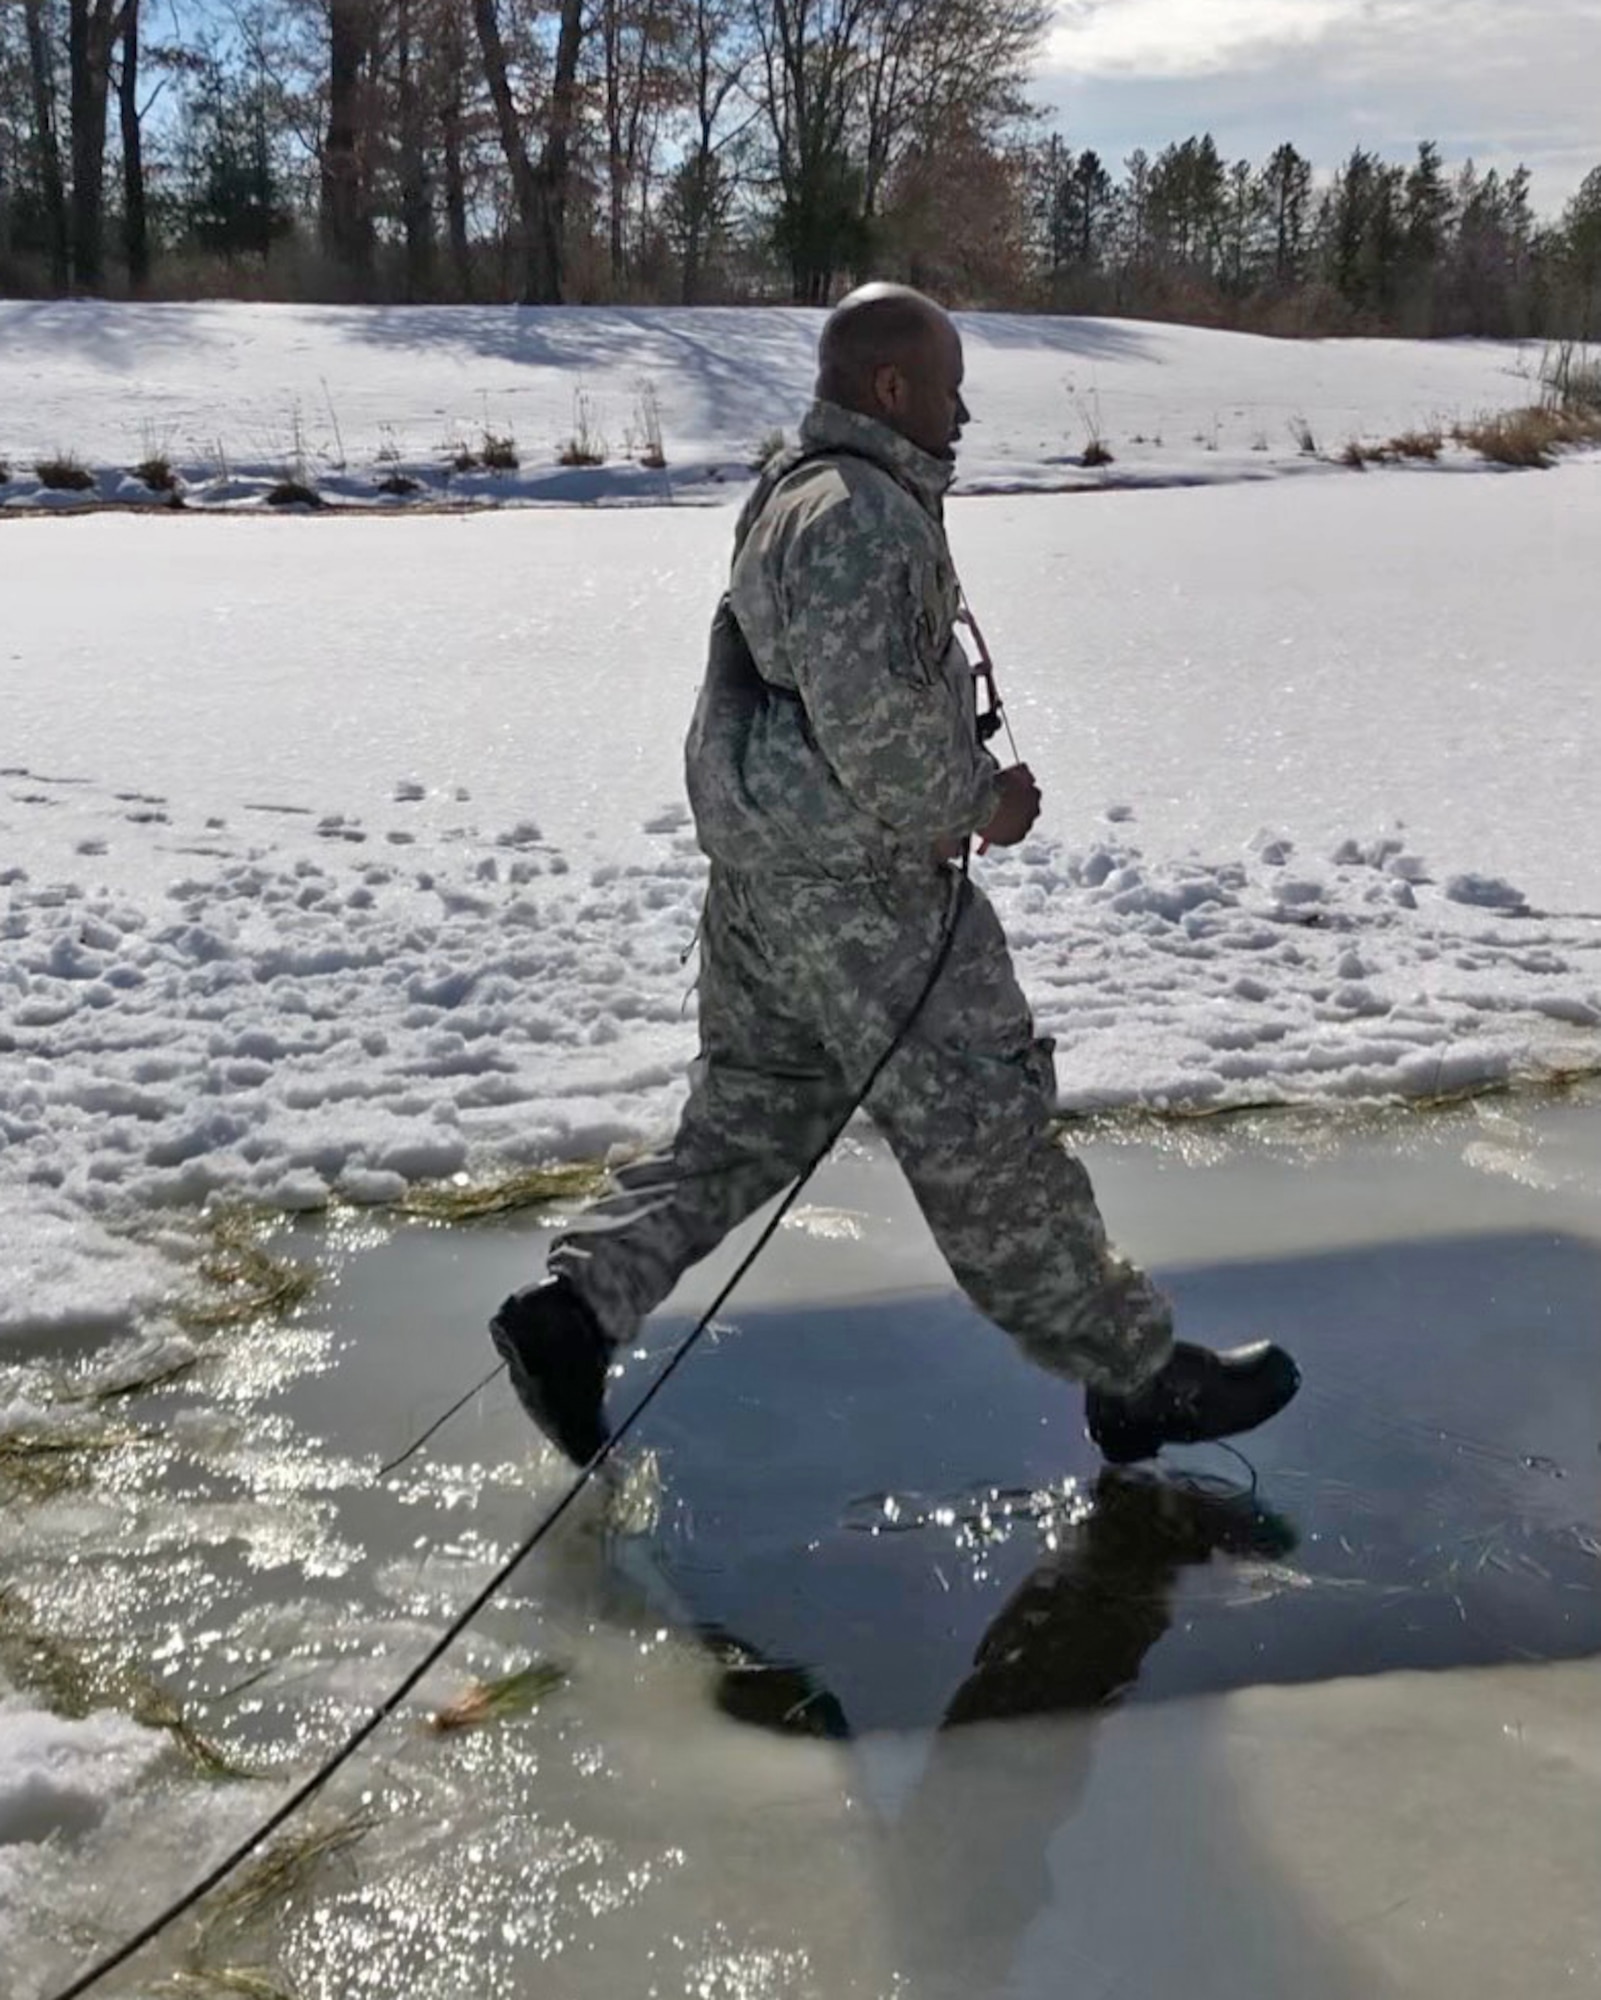 Staff Sgt. Rashad Wilson jumps into freezing water at U.S. Army's Cold Weather Operations Course.